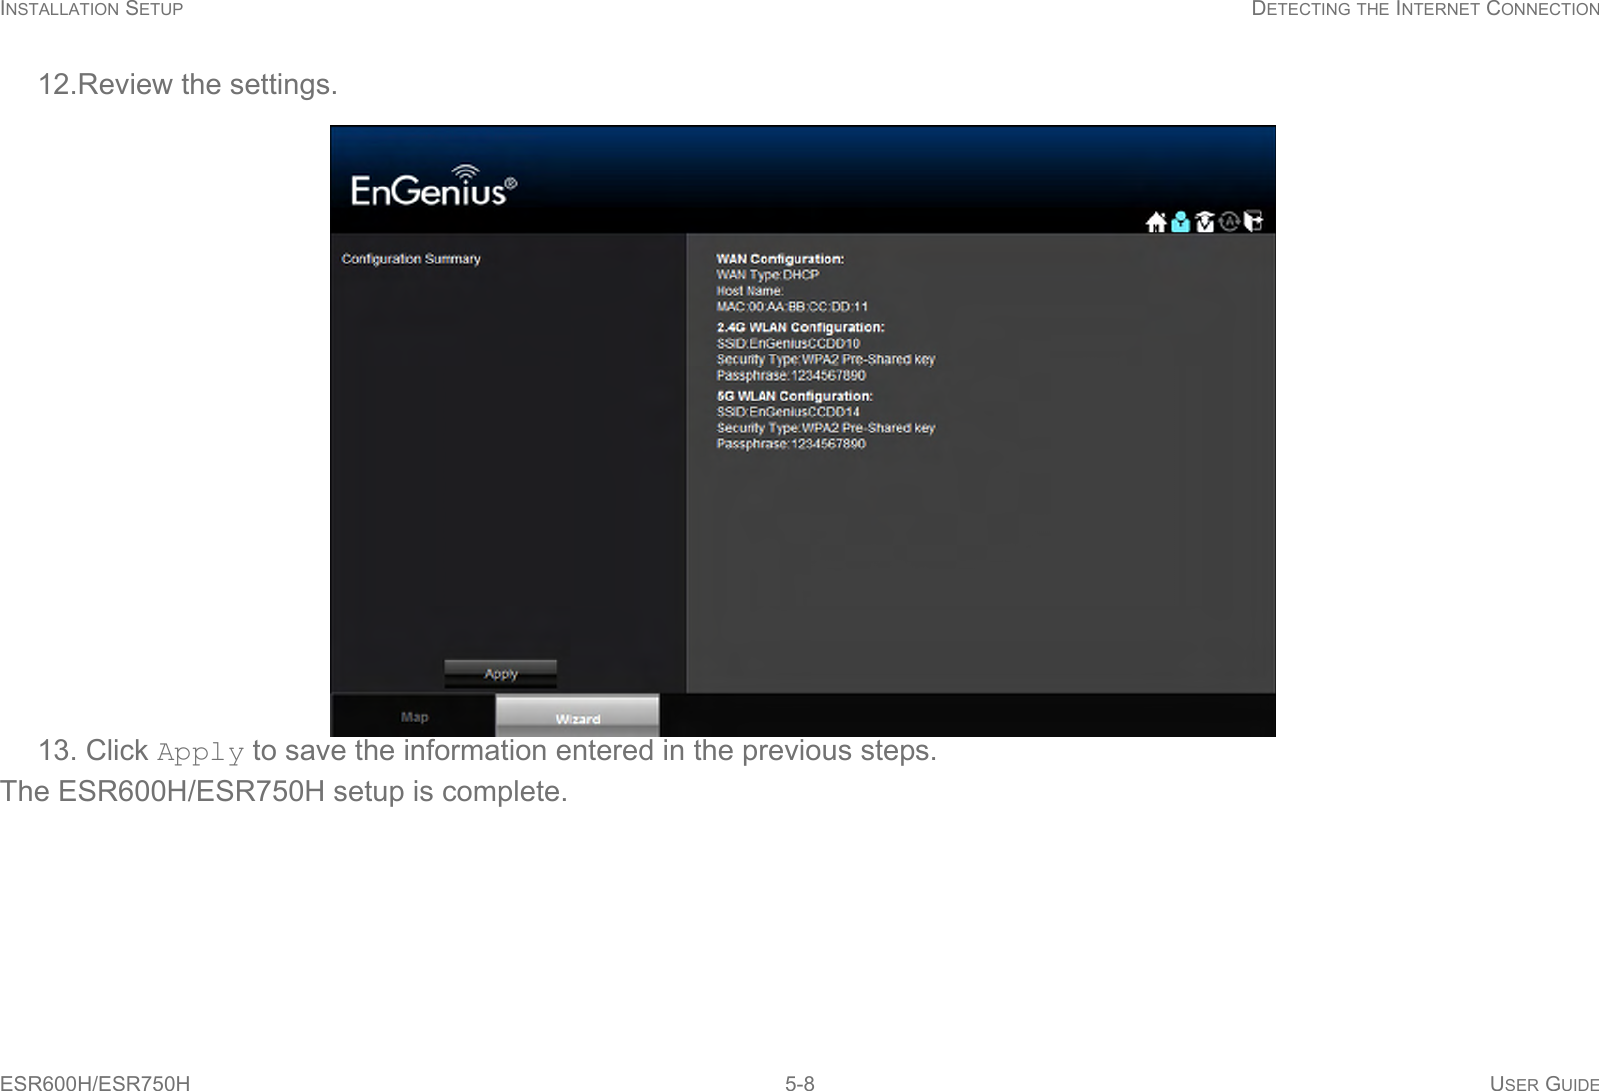 INSTALLATION SETUP DETECTING THE INTERNET CONNECTIONESR600H/ESR750H 5-8 USER GUIDE12.Review the settings.13. Click Apply to save the information entered in the previous steps. The ESR600H/ESR750H setup is complete.